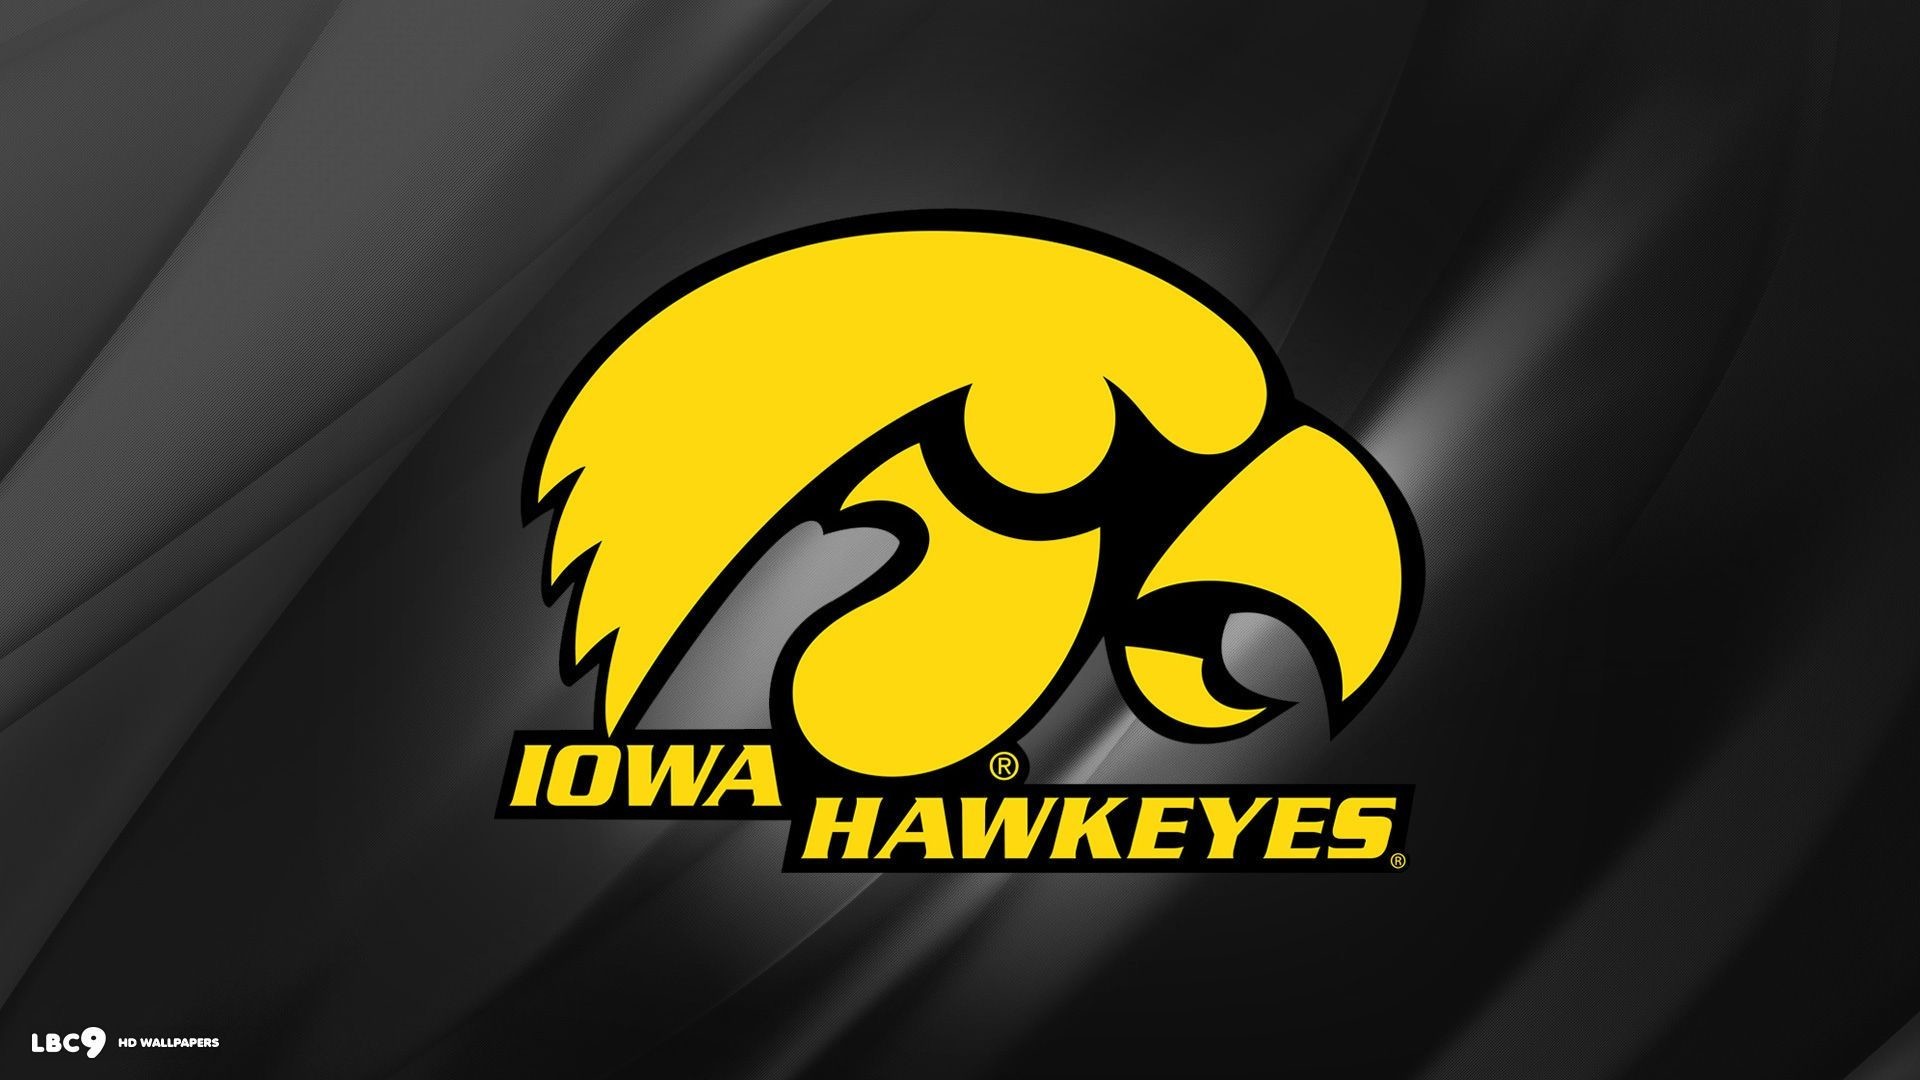 Res 1920x1920 Iowa Hawkeyes Wallpaper Widescreen Of Smartphone High Resolution 1920x1080